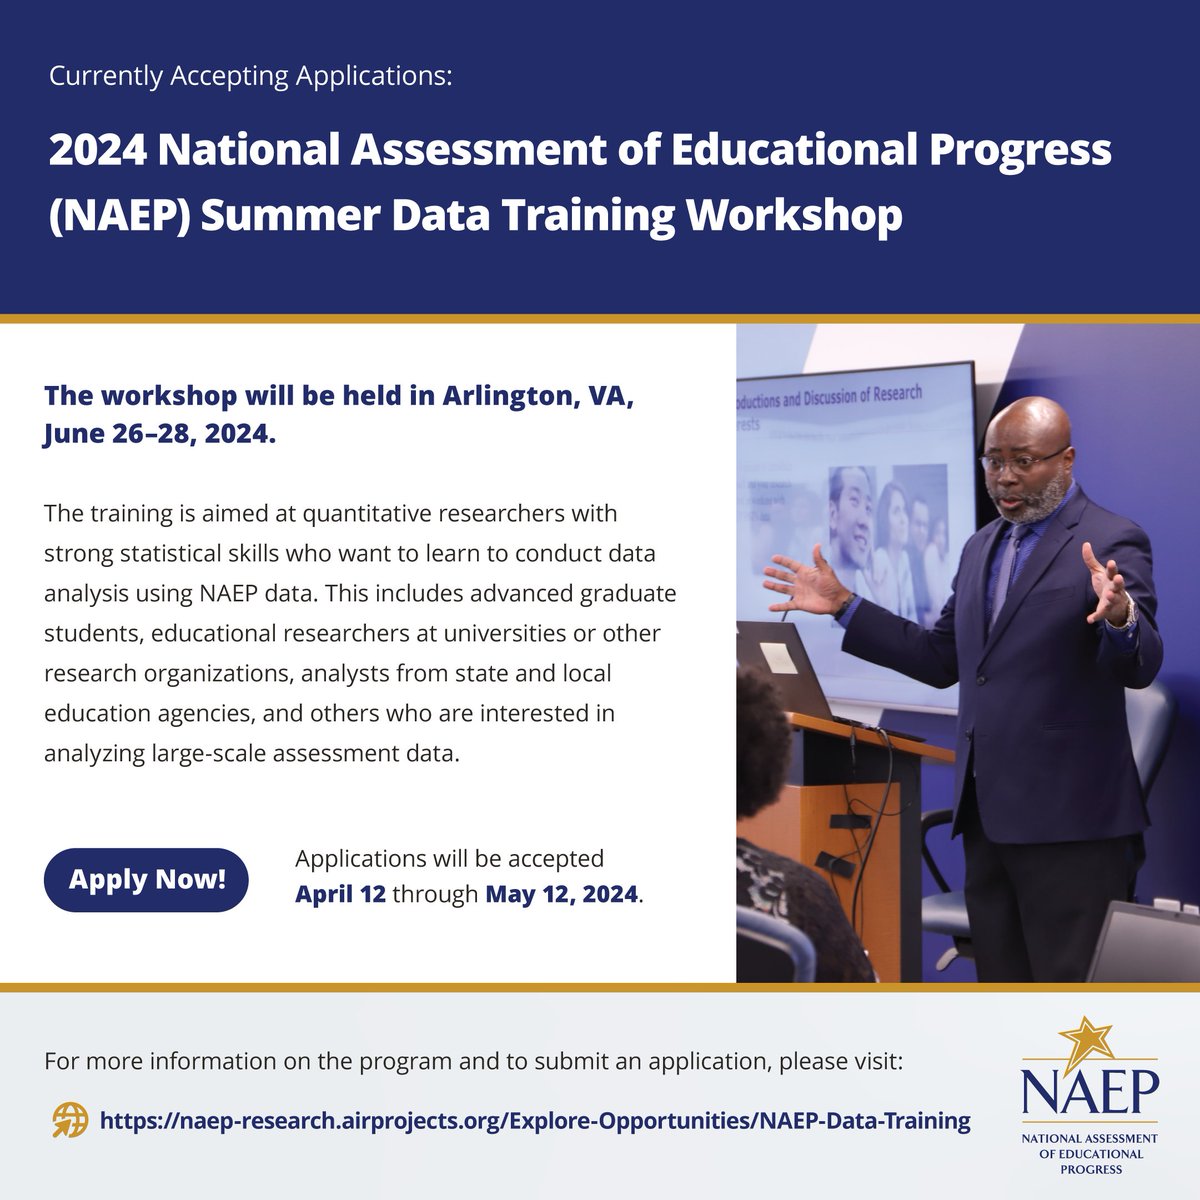 Ready to elevate your #EdResearch skills? The @NAEP_NCES Data Training Workshop (June 26-28) will train participants to conduct #data analysis using #EdStats from the #NAEP assessments. Submit your application by 5/12: naep-research.airprojects.org/Explore-Opport…